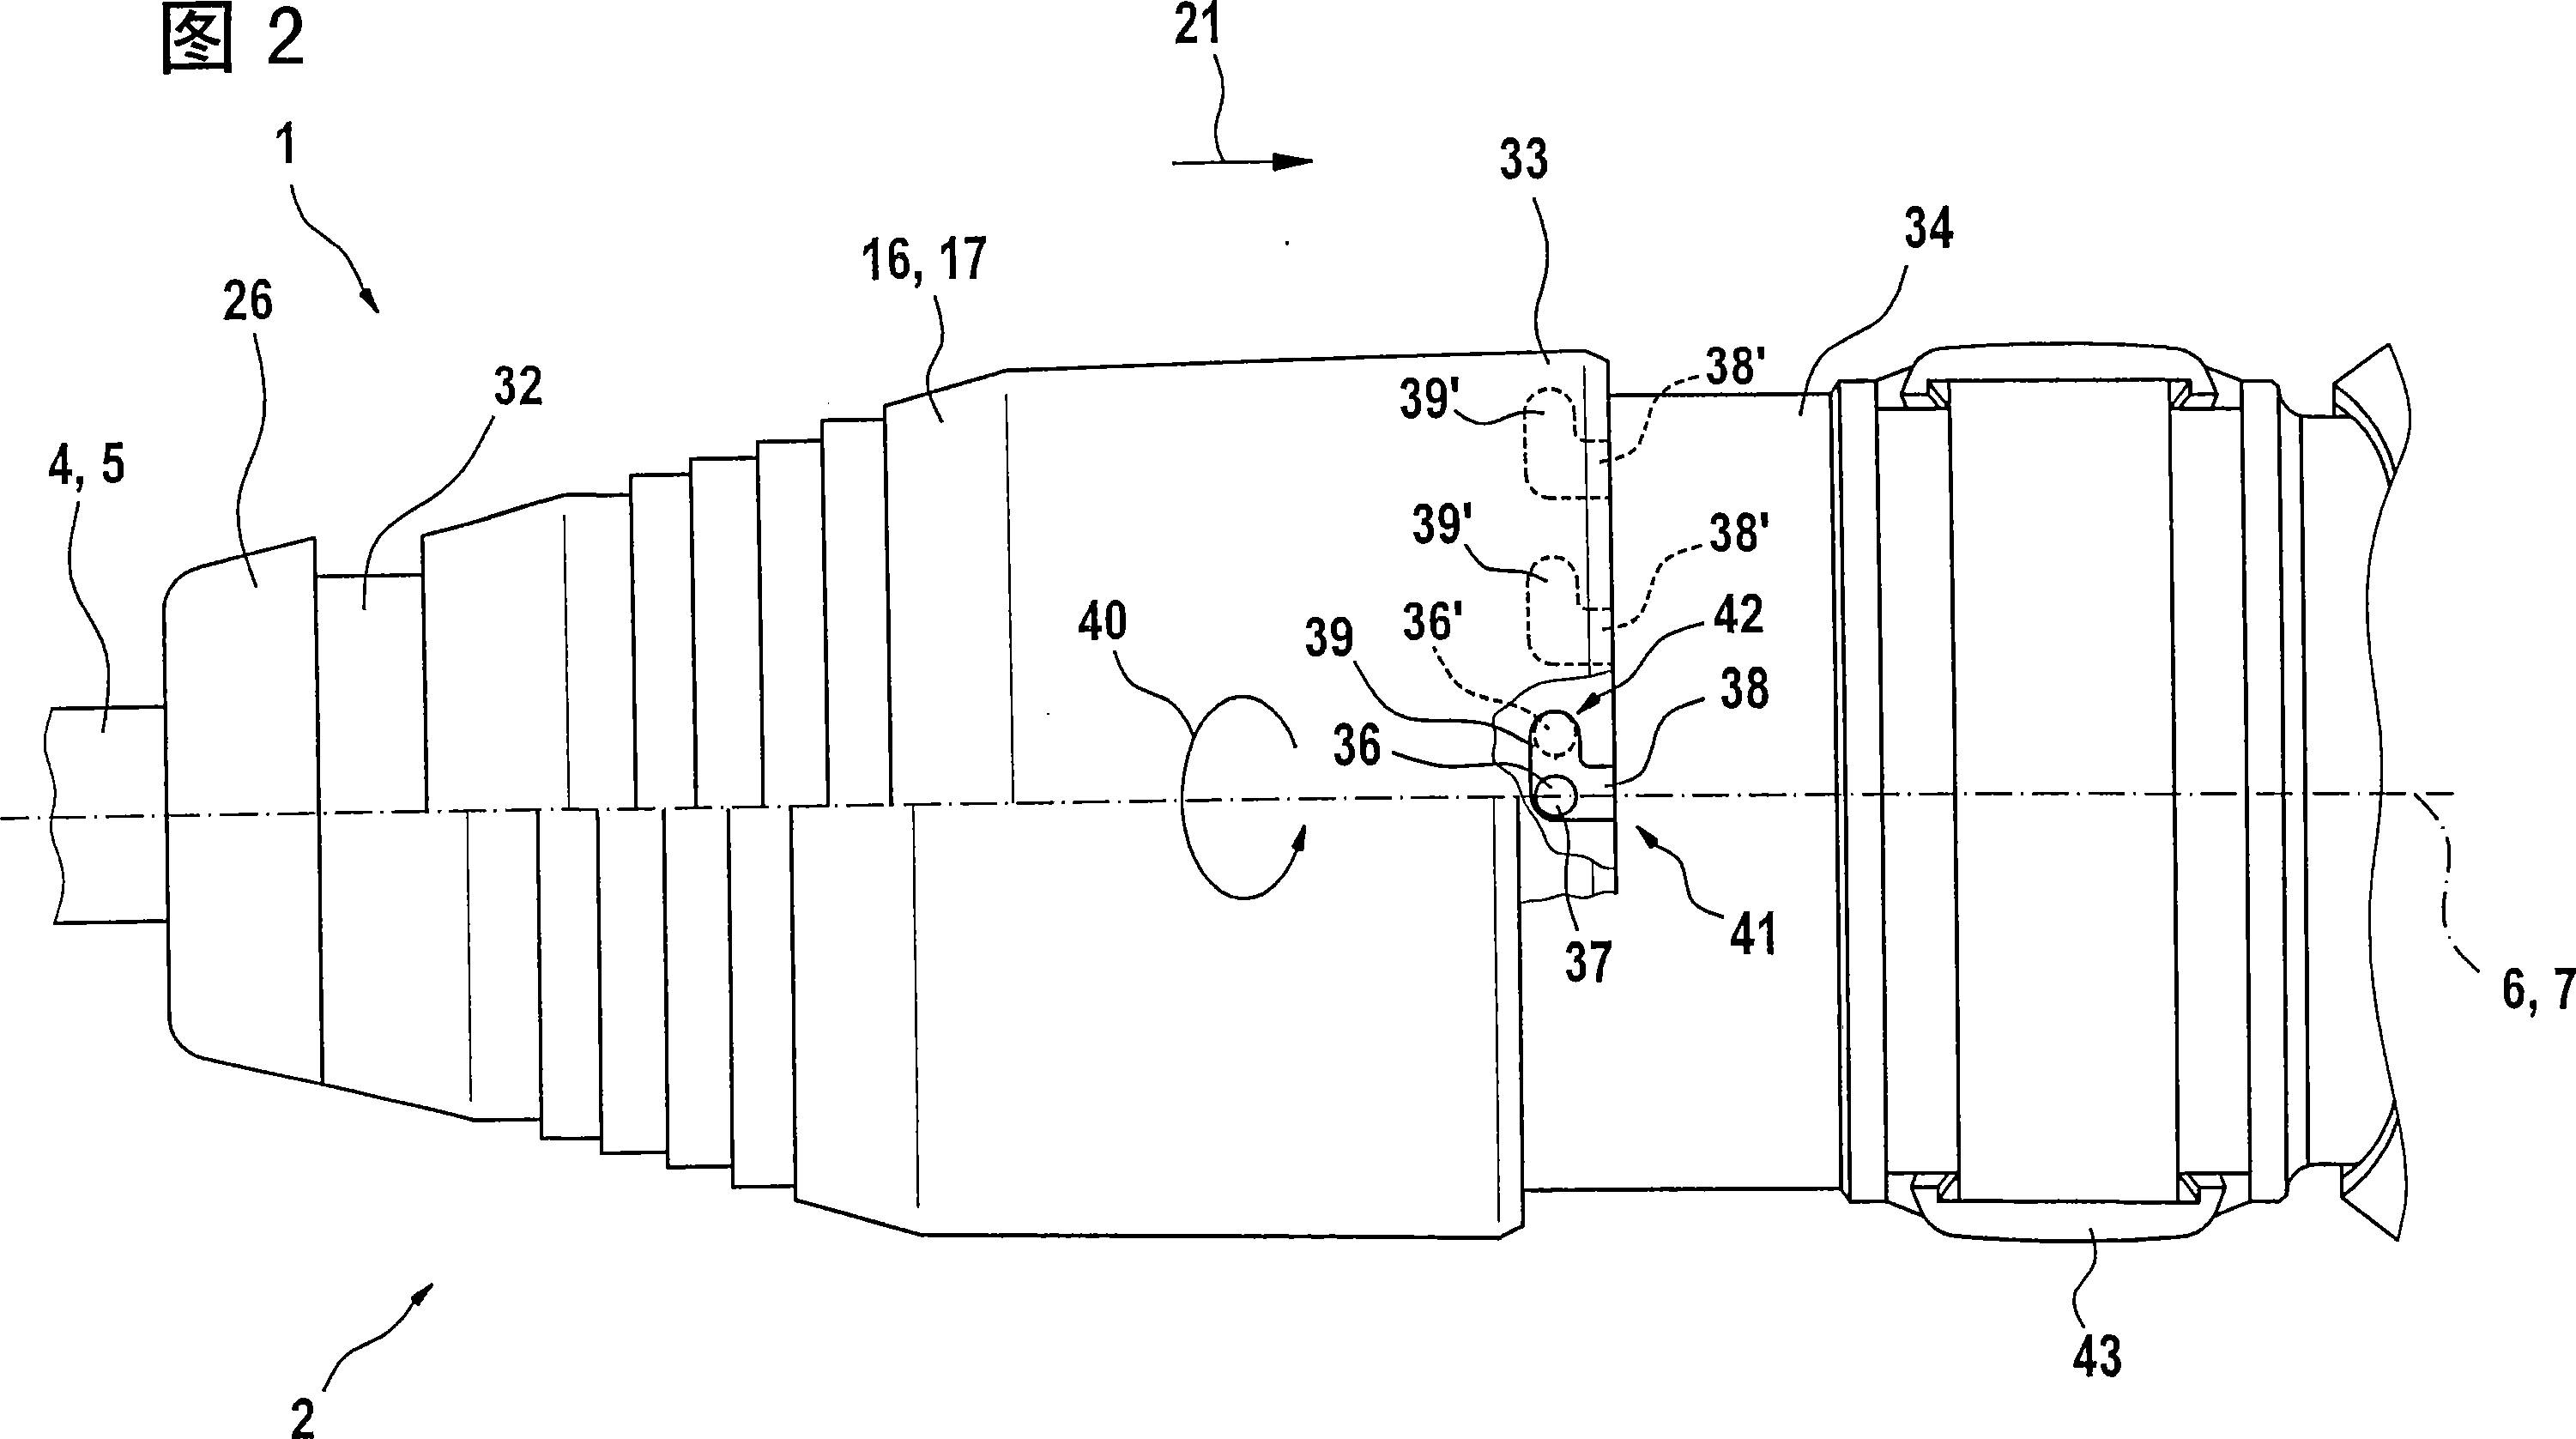 Electric hand tool machine having a tool locking system